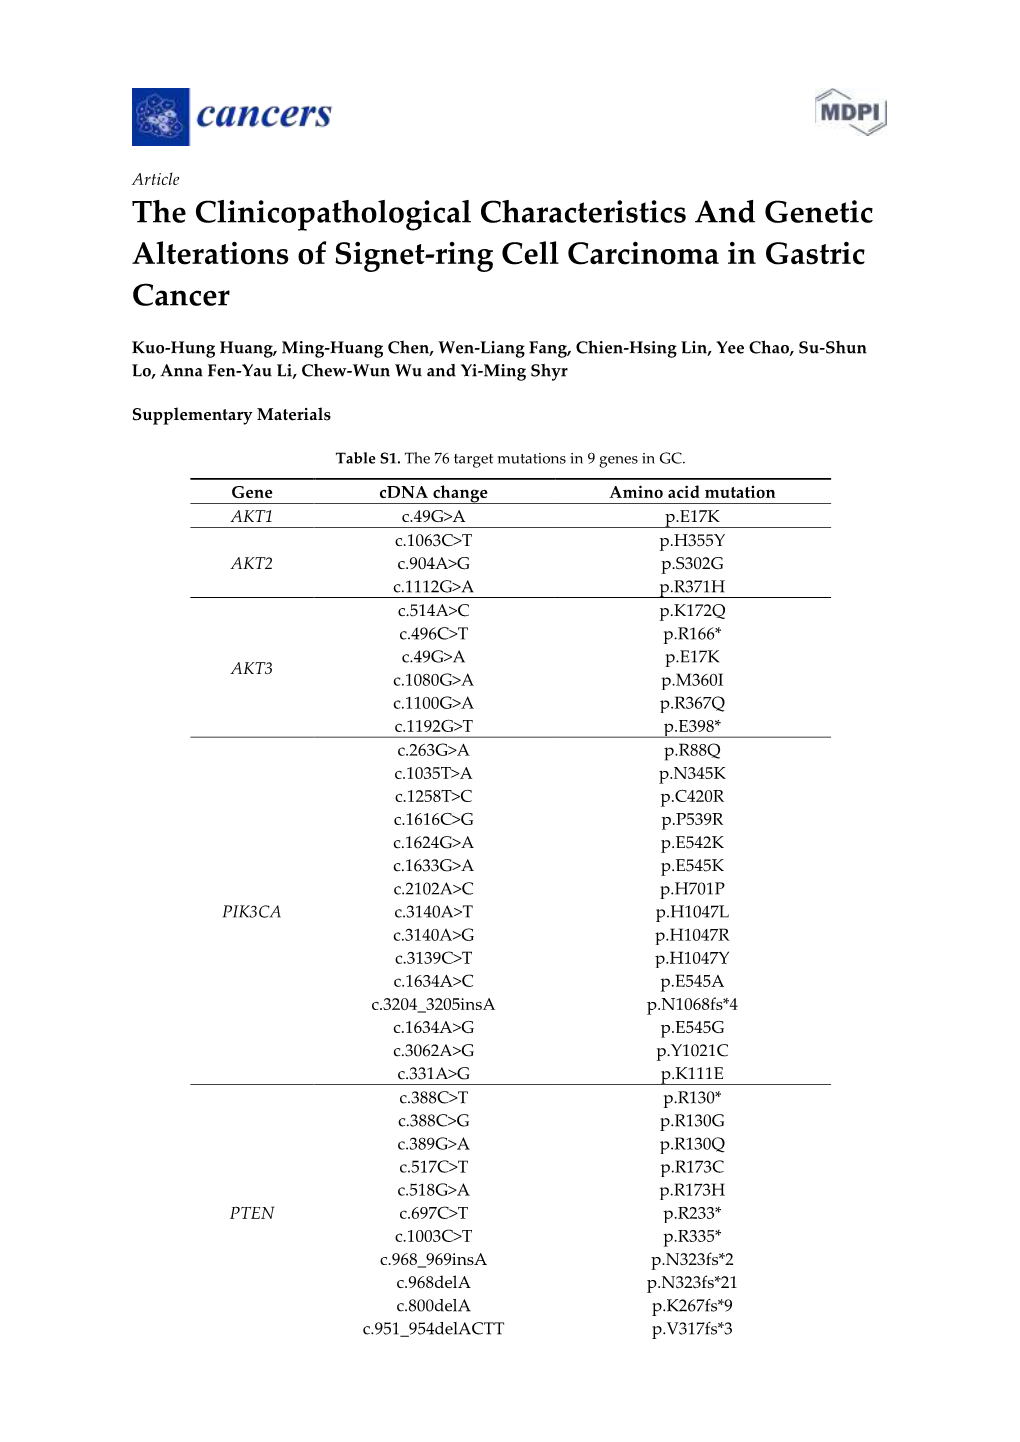 The Clinicopathological Characteristics and Genetic Alterations of Signet-Ring Cell Carcinoma in Gastric Cancer